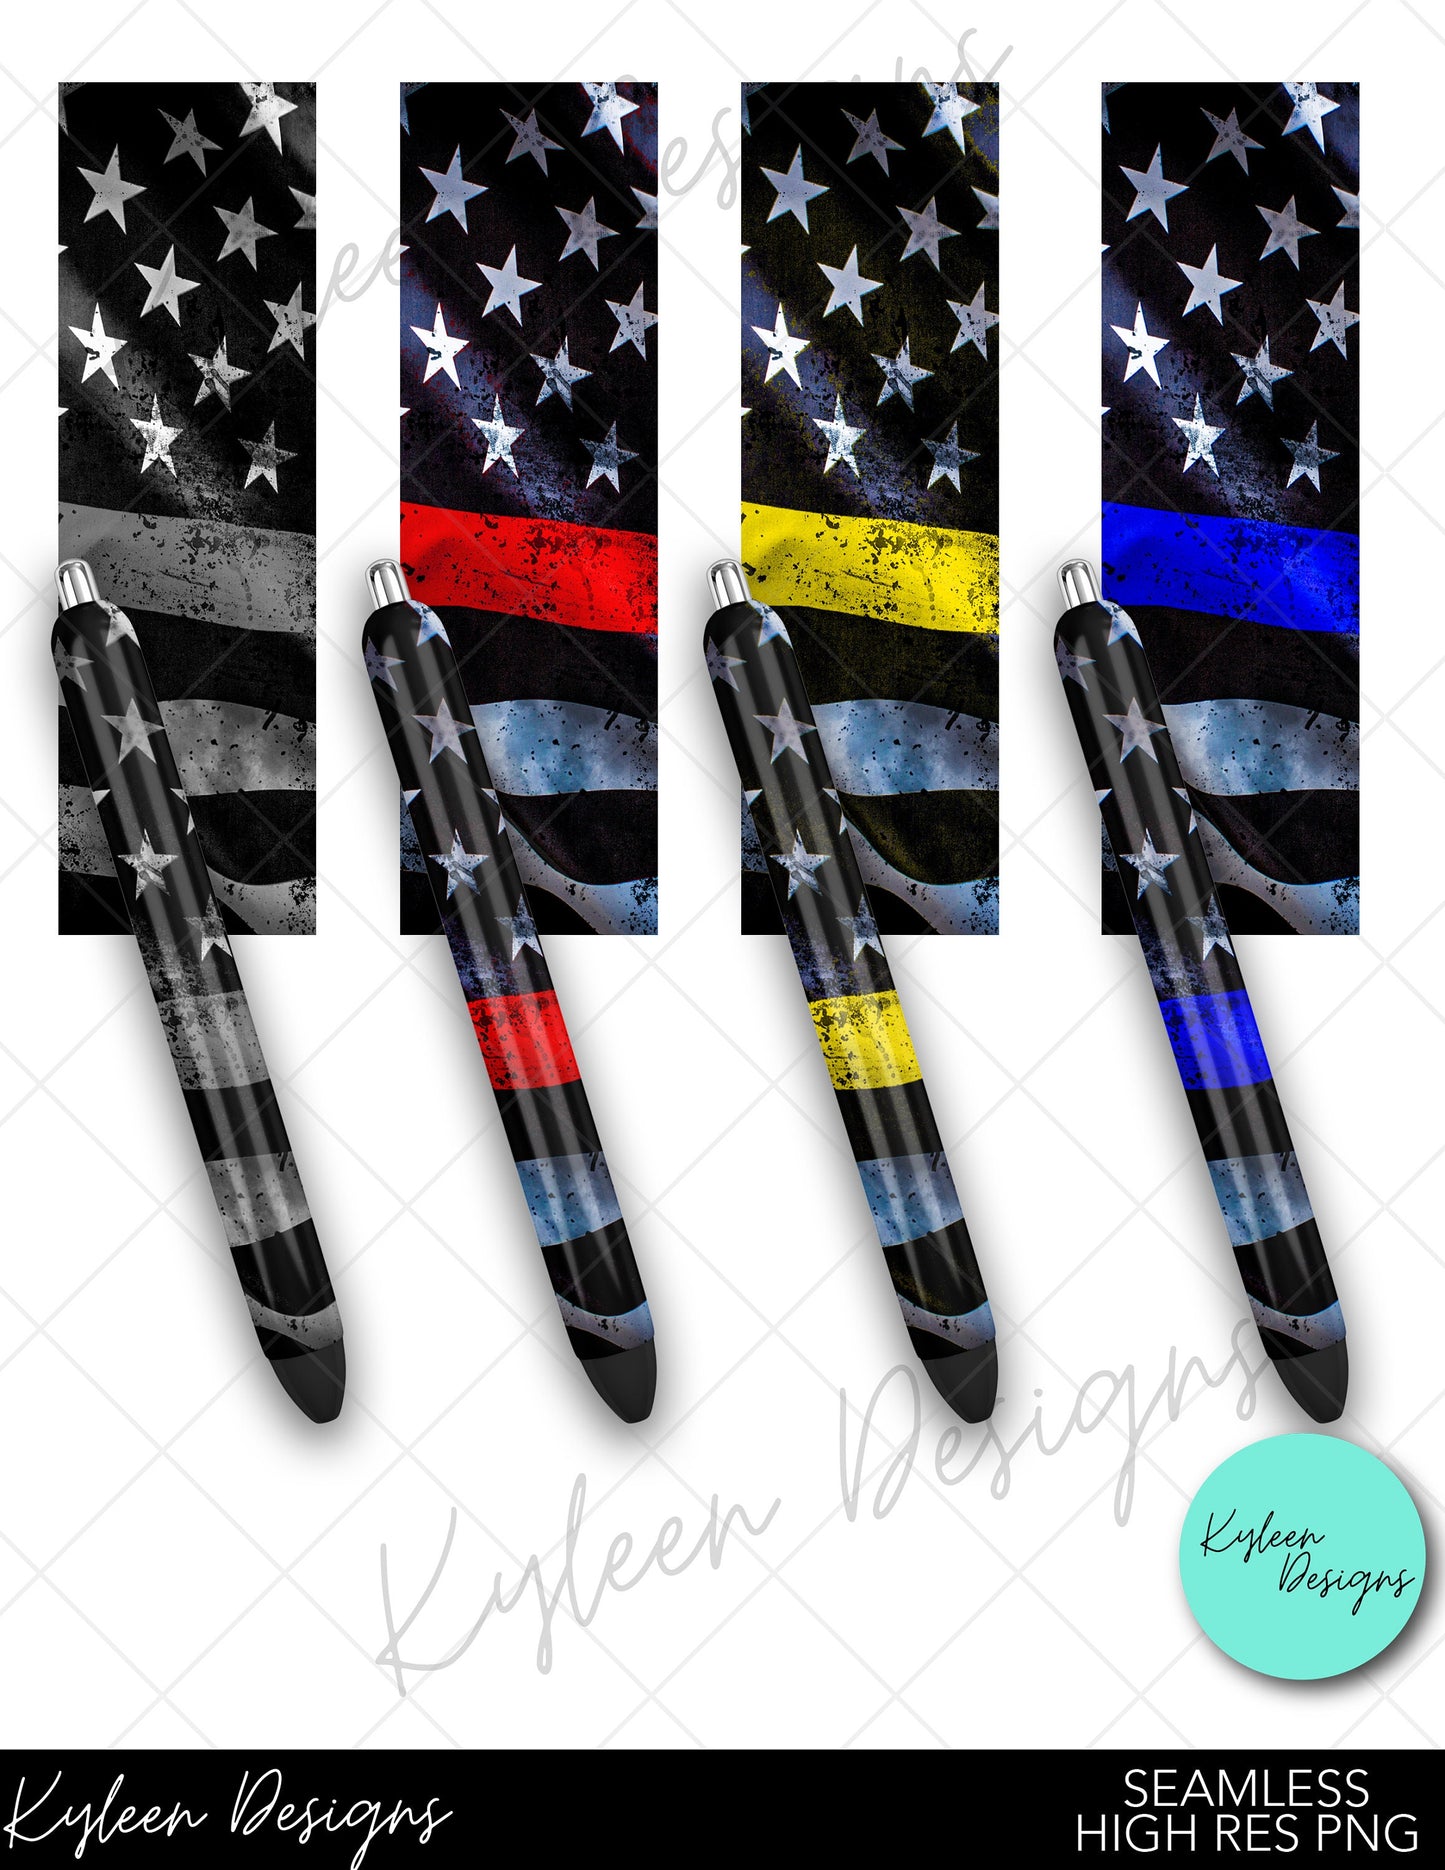 blue, red, yellow, gray flag line pen wraps for waterslide, vinyl, sublimation high RES PNG